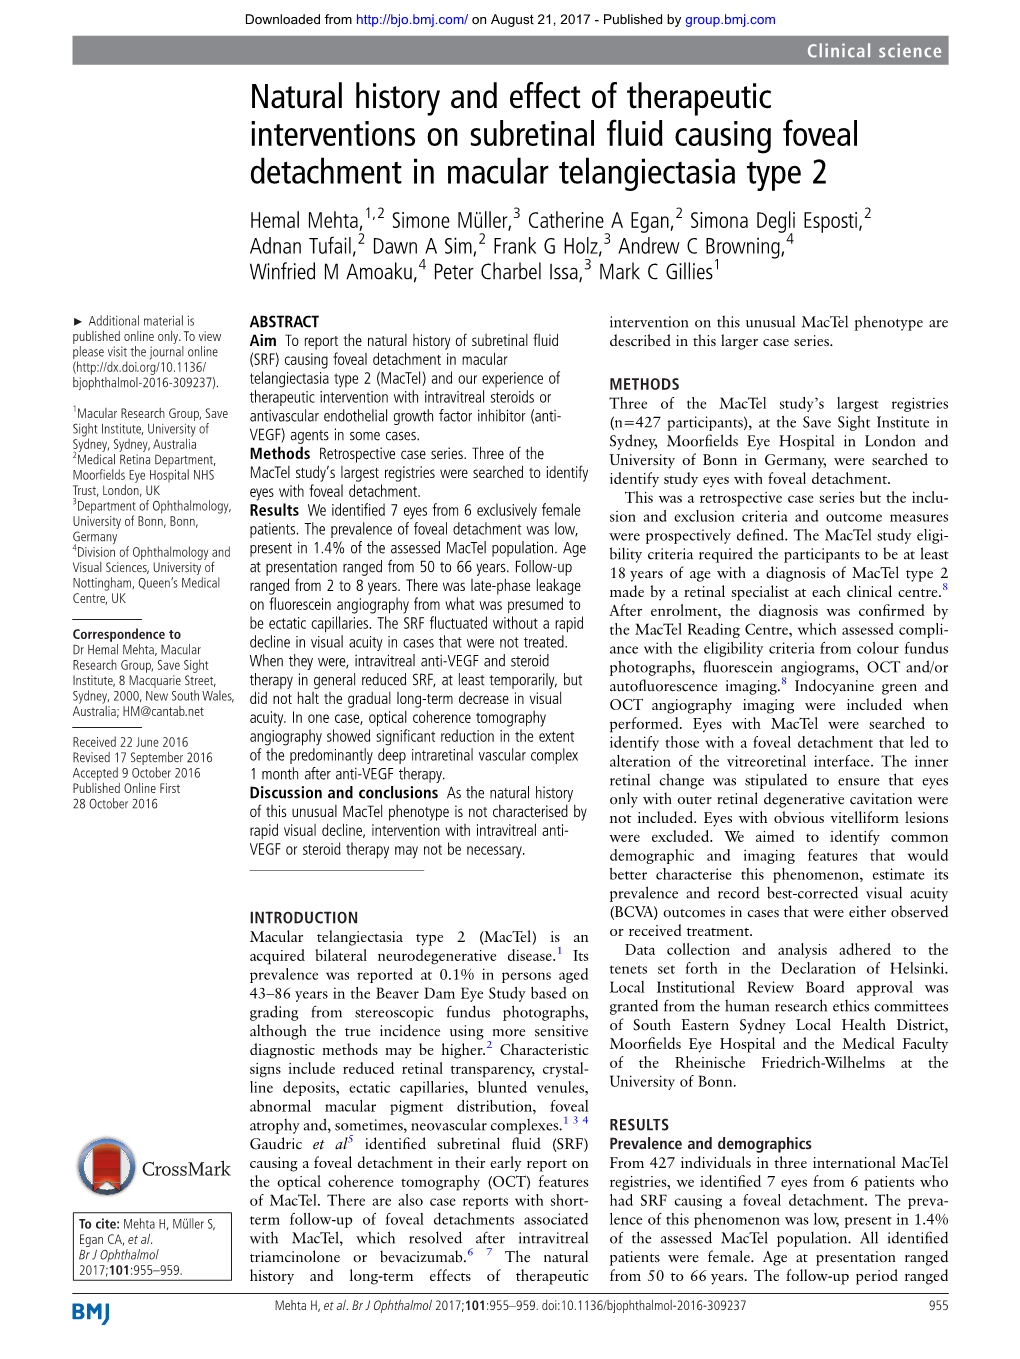 Natural History and Effect of Therapeutic Interventions On